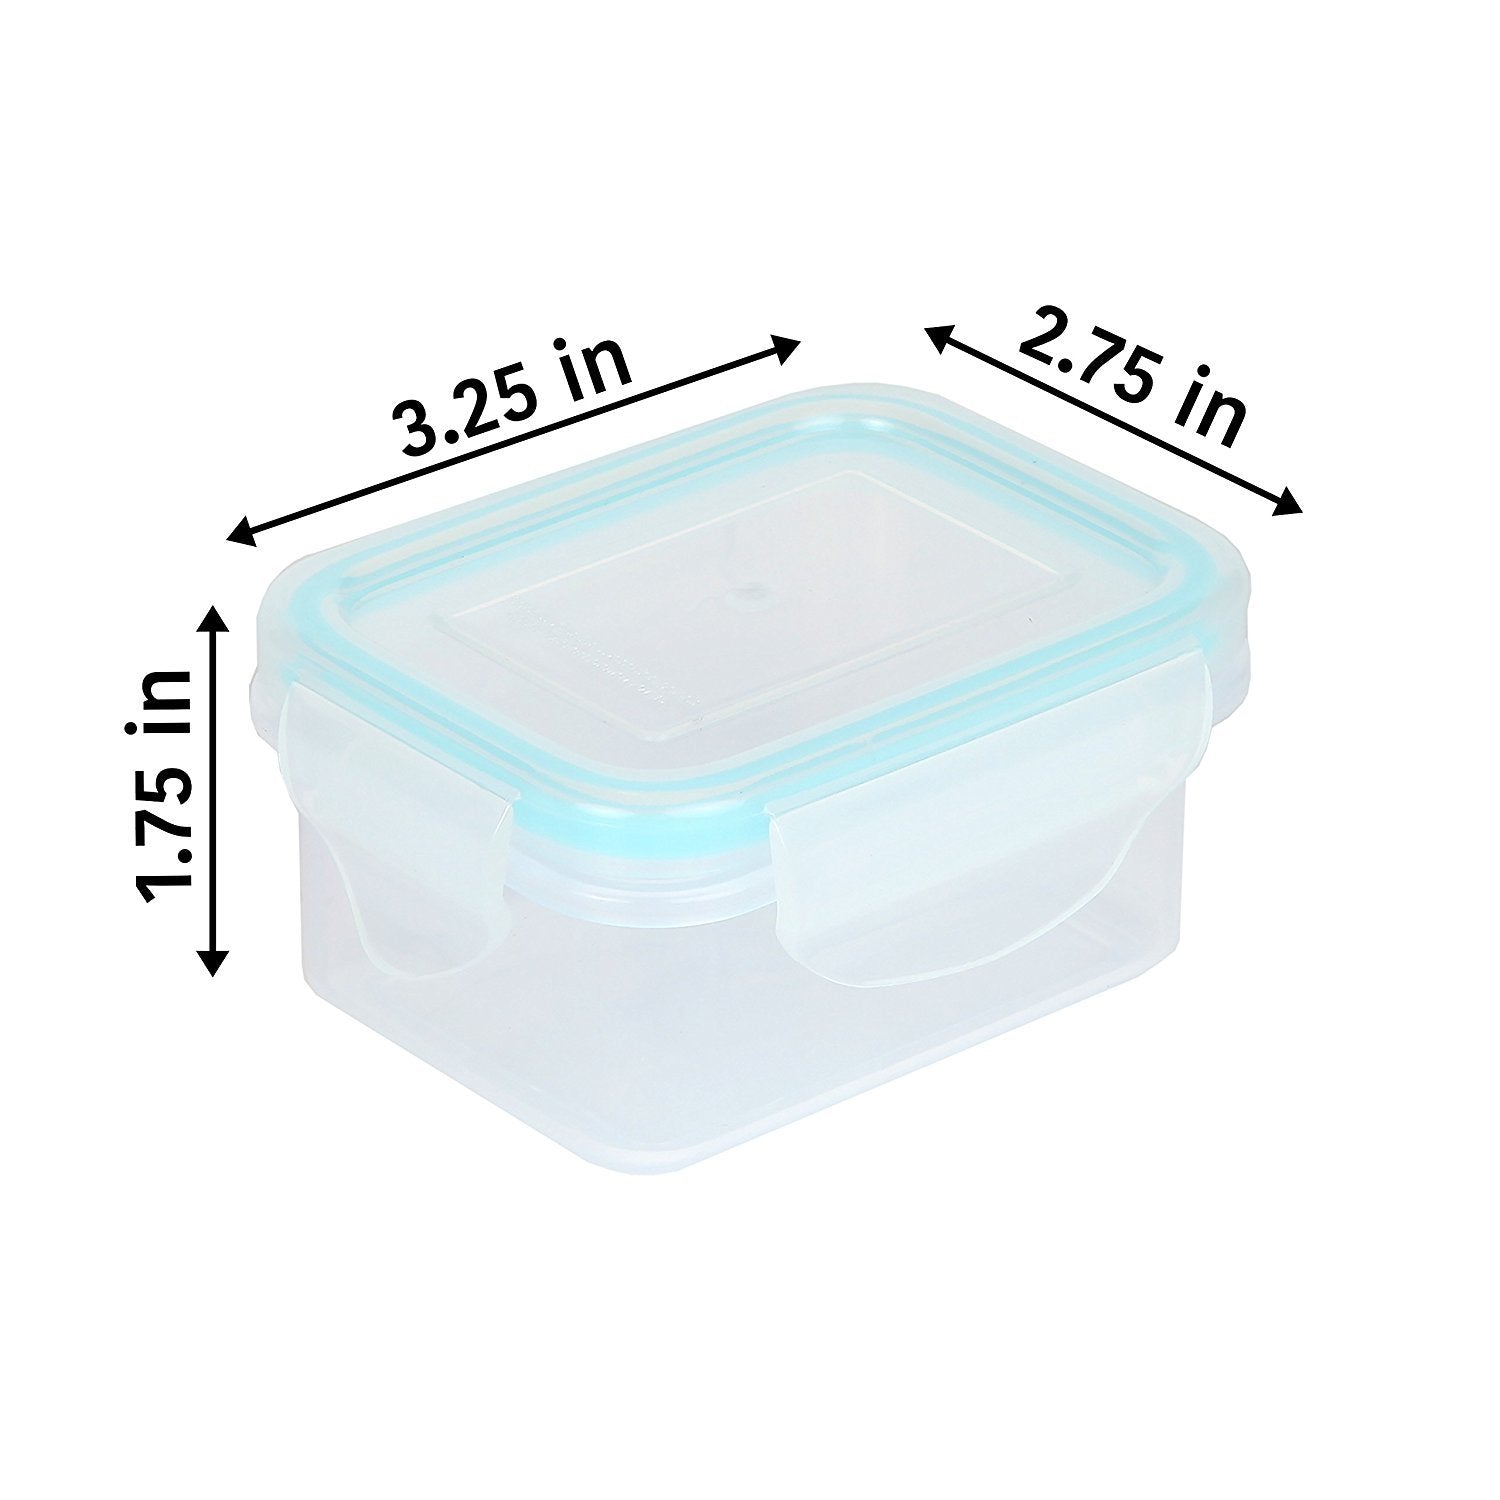 Bento box meal prep containers - 5 Leak Proof Lunch Box